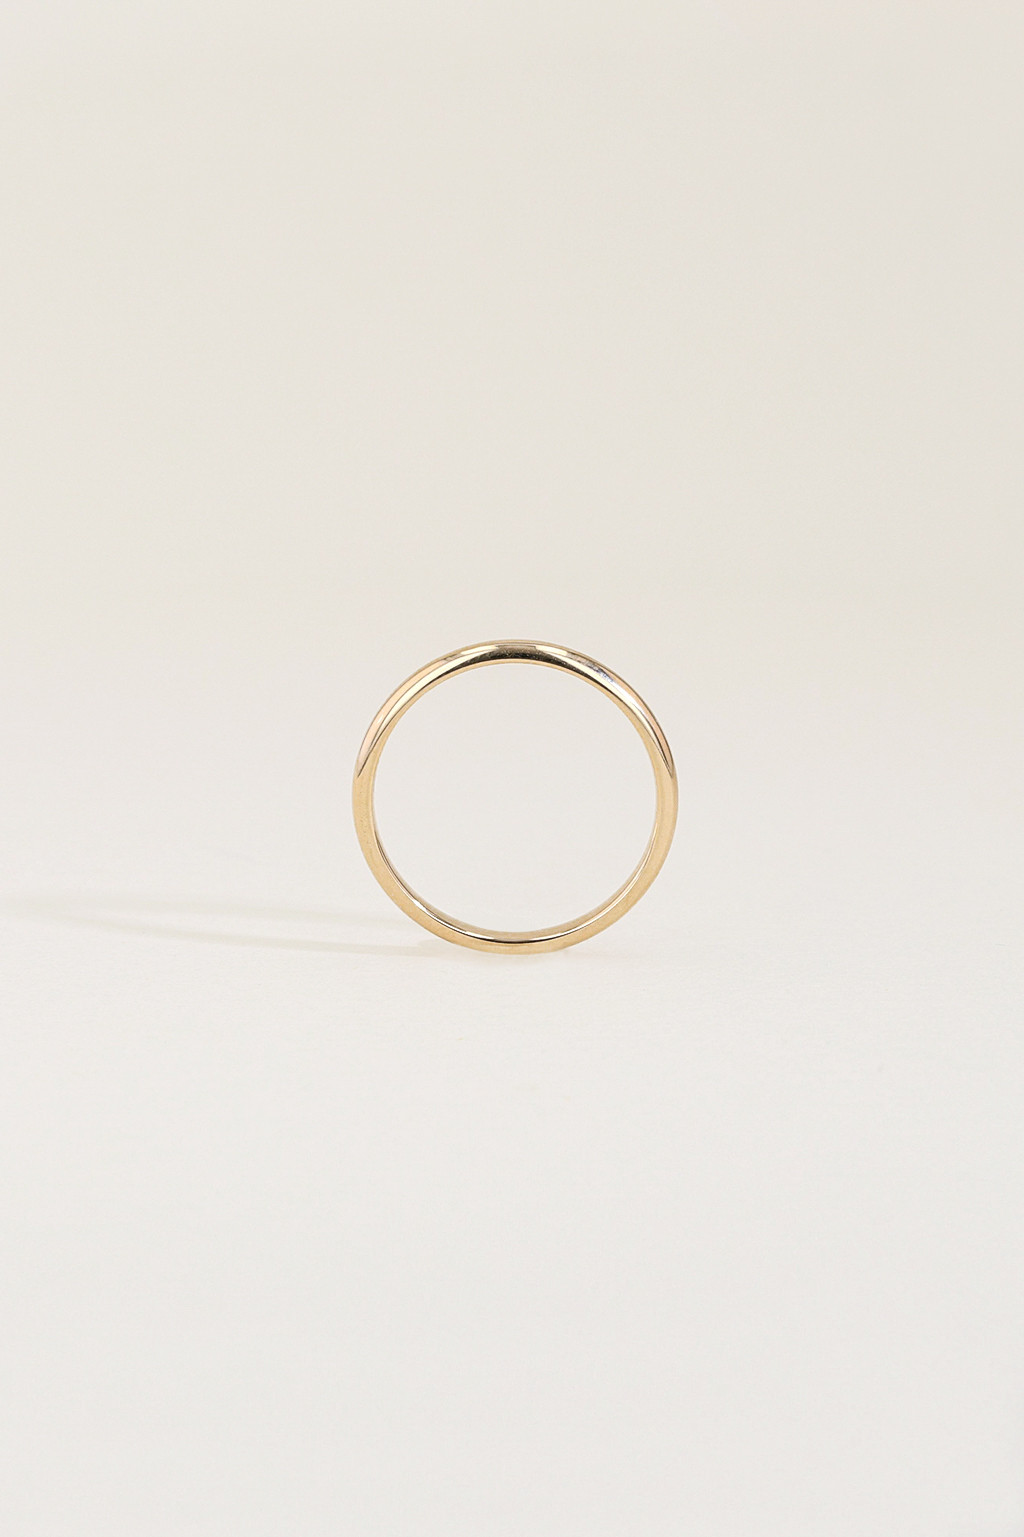 The Classic Gold Wedding Ring standing view